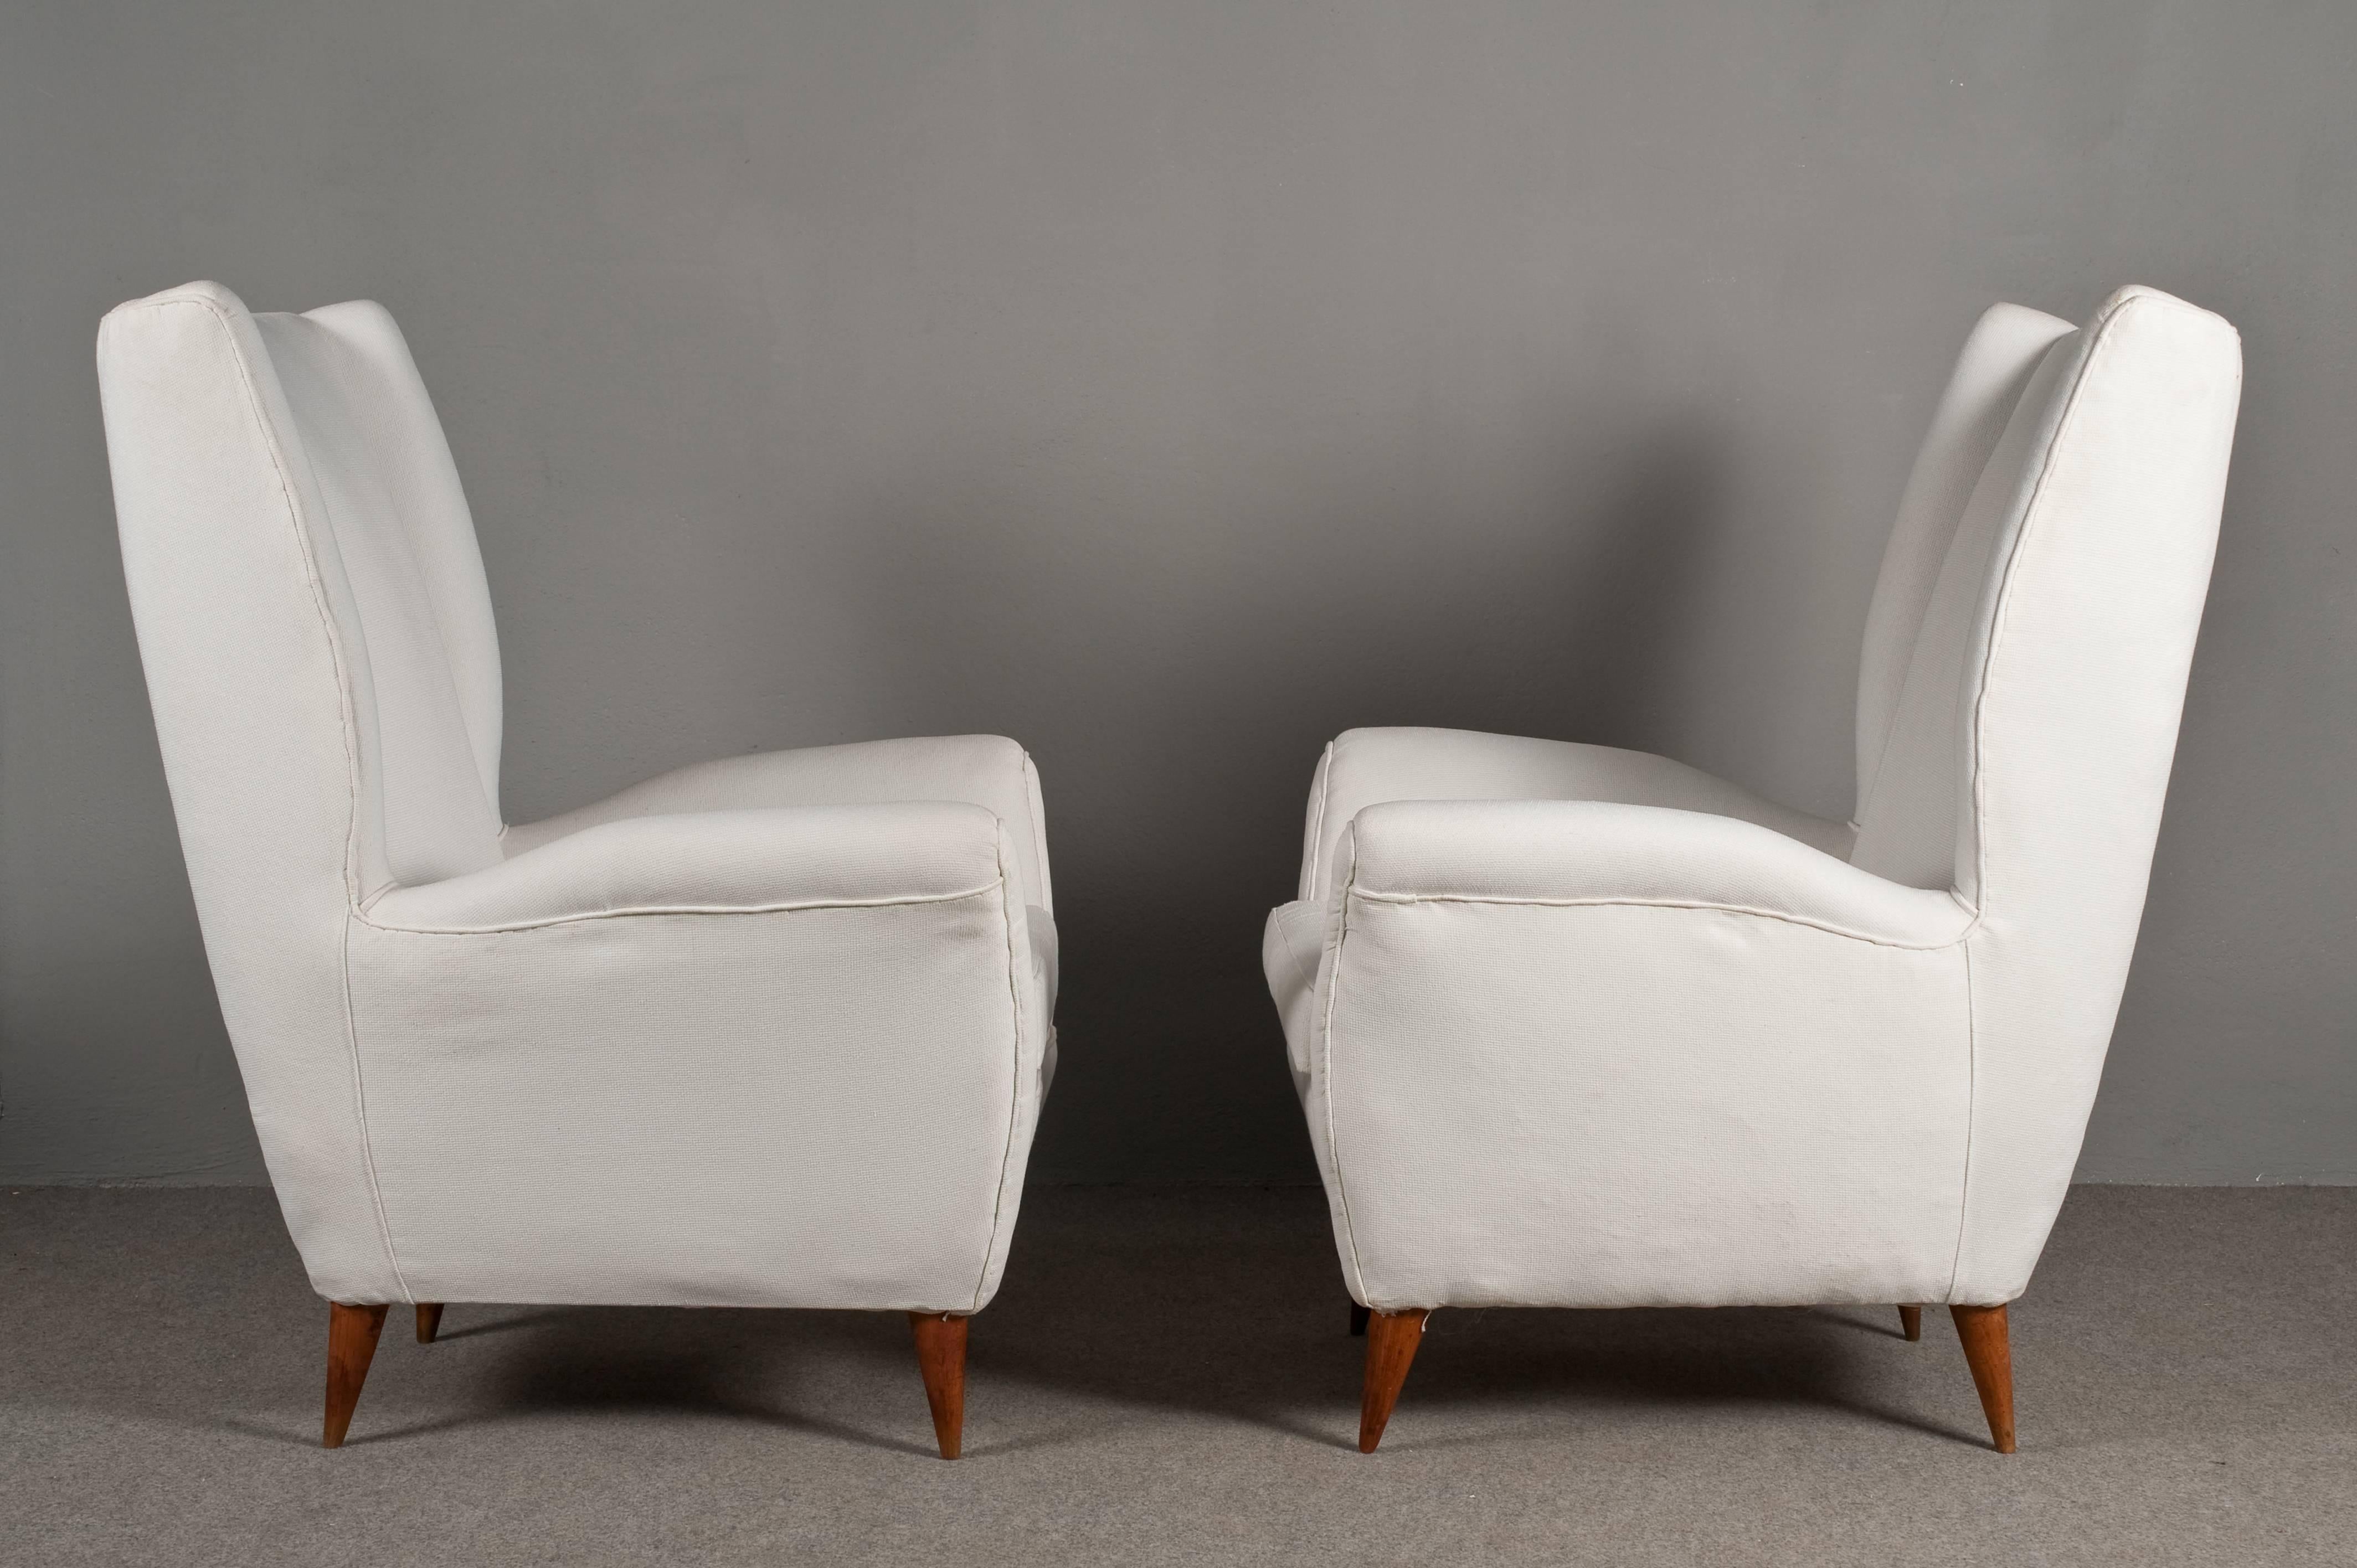 Elegant pair of armchairs designed by Gio Ponti in the end of 1940s. 
Expertise by Gio Ponti Archives. 
Reupholstered with white cotton.